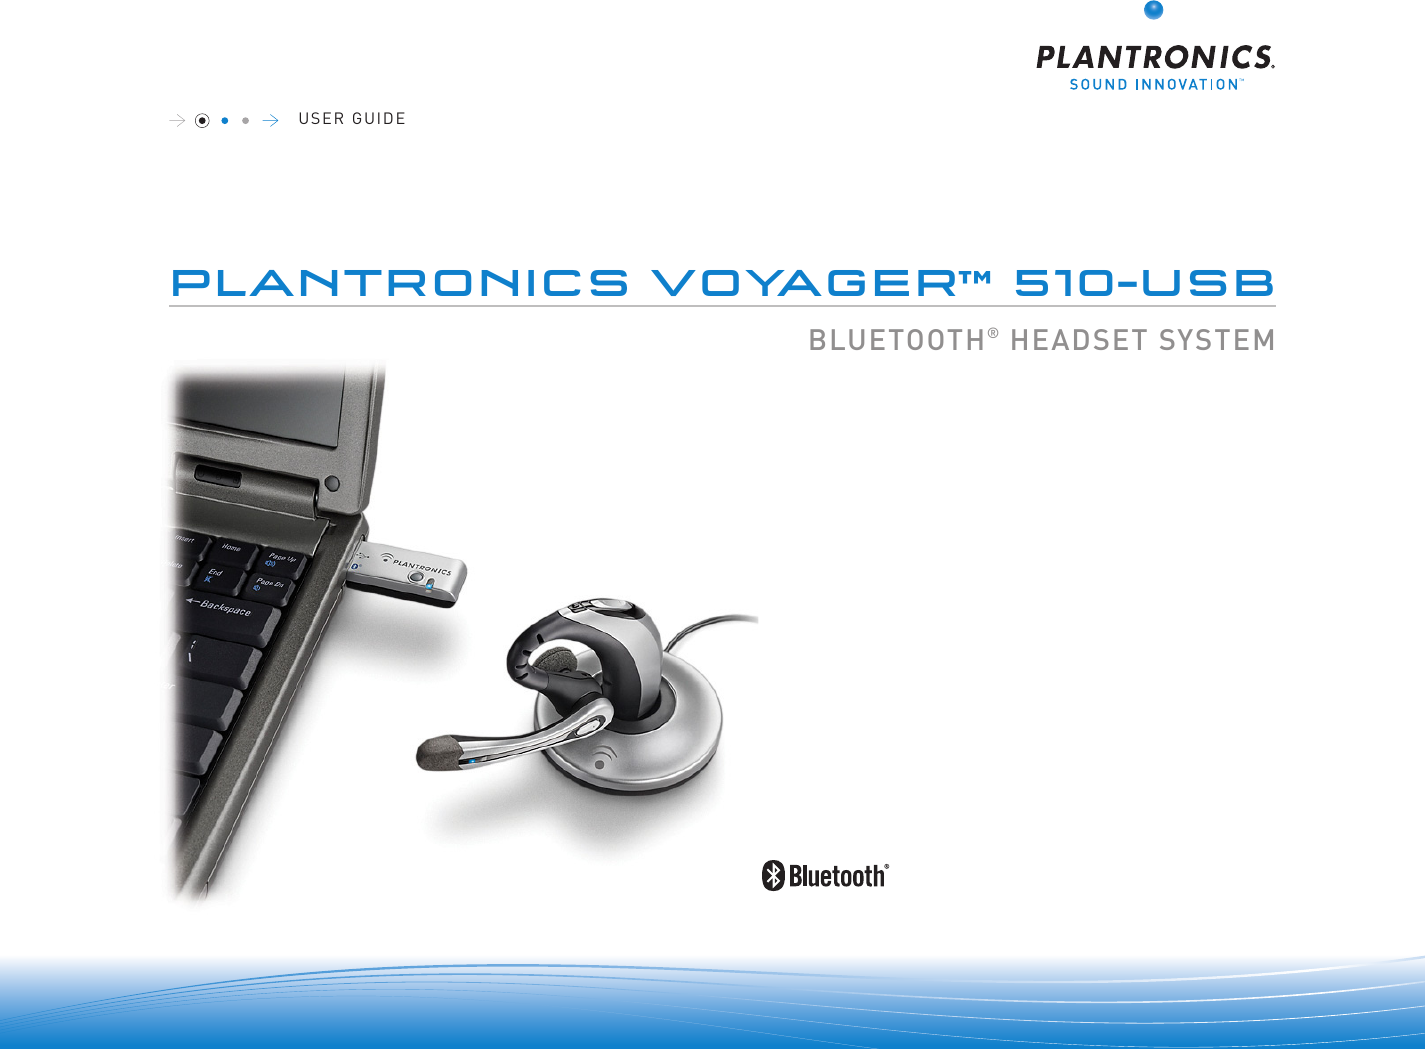 0 0 0Plantronics VoYaGEr™ 510-UsBBLUETOOTH® HEADSET SySTEmUSER GUIDE